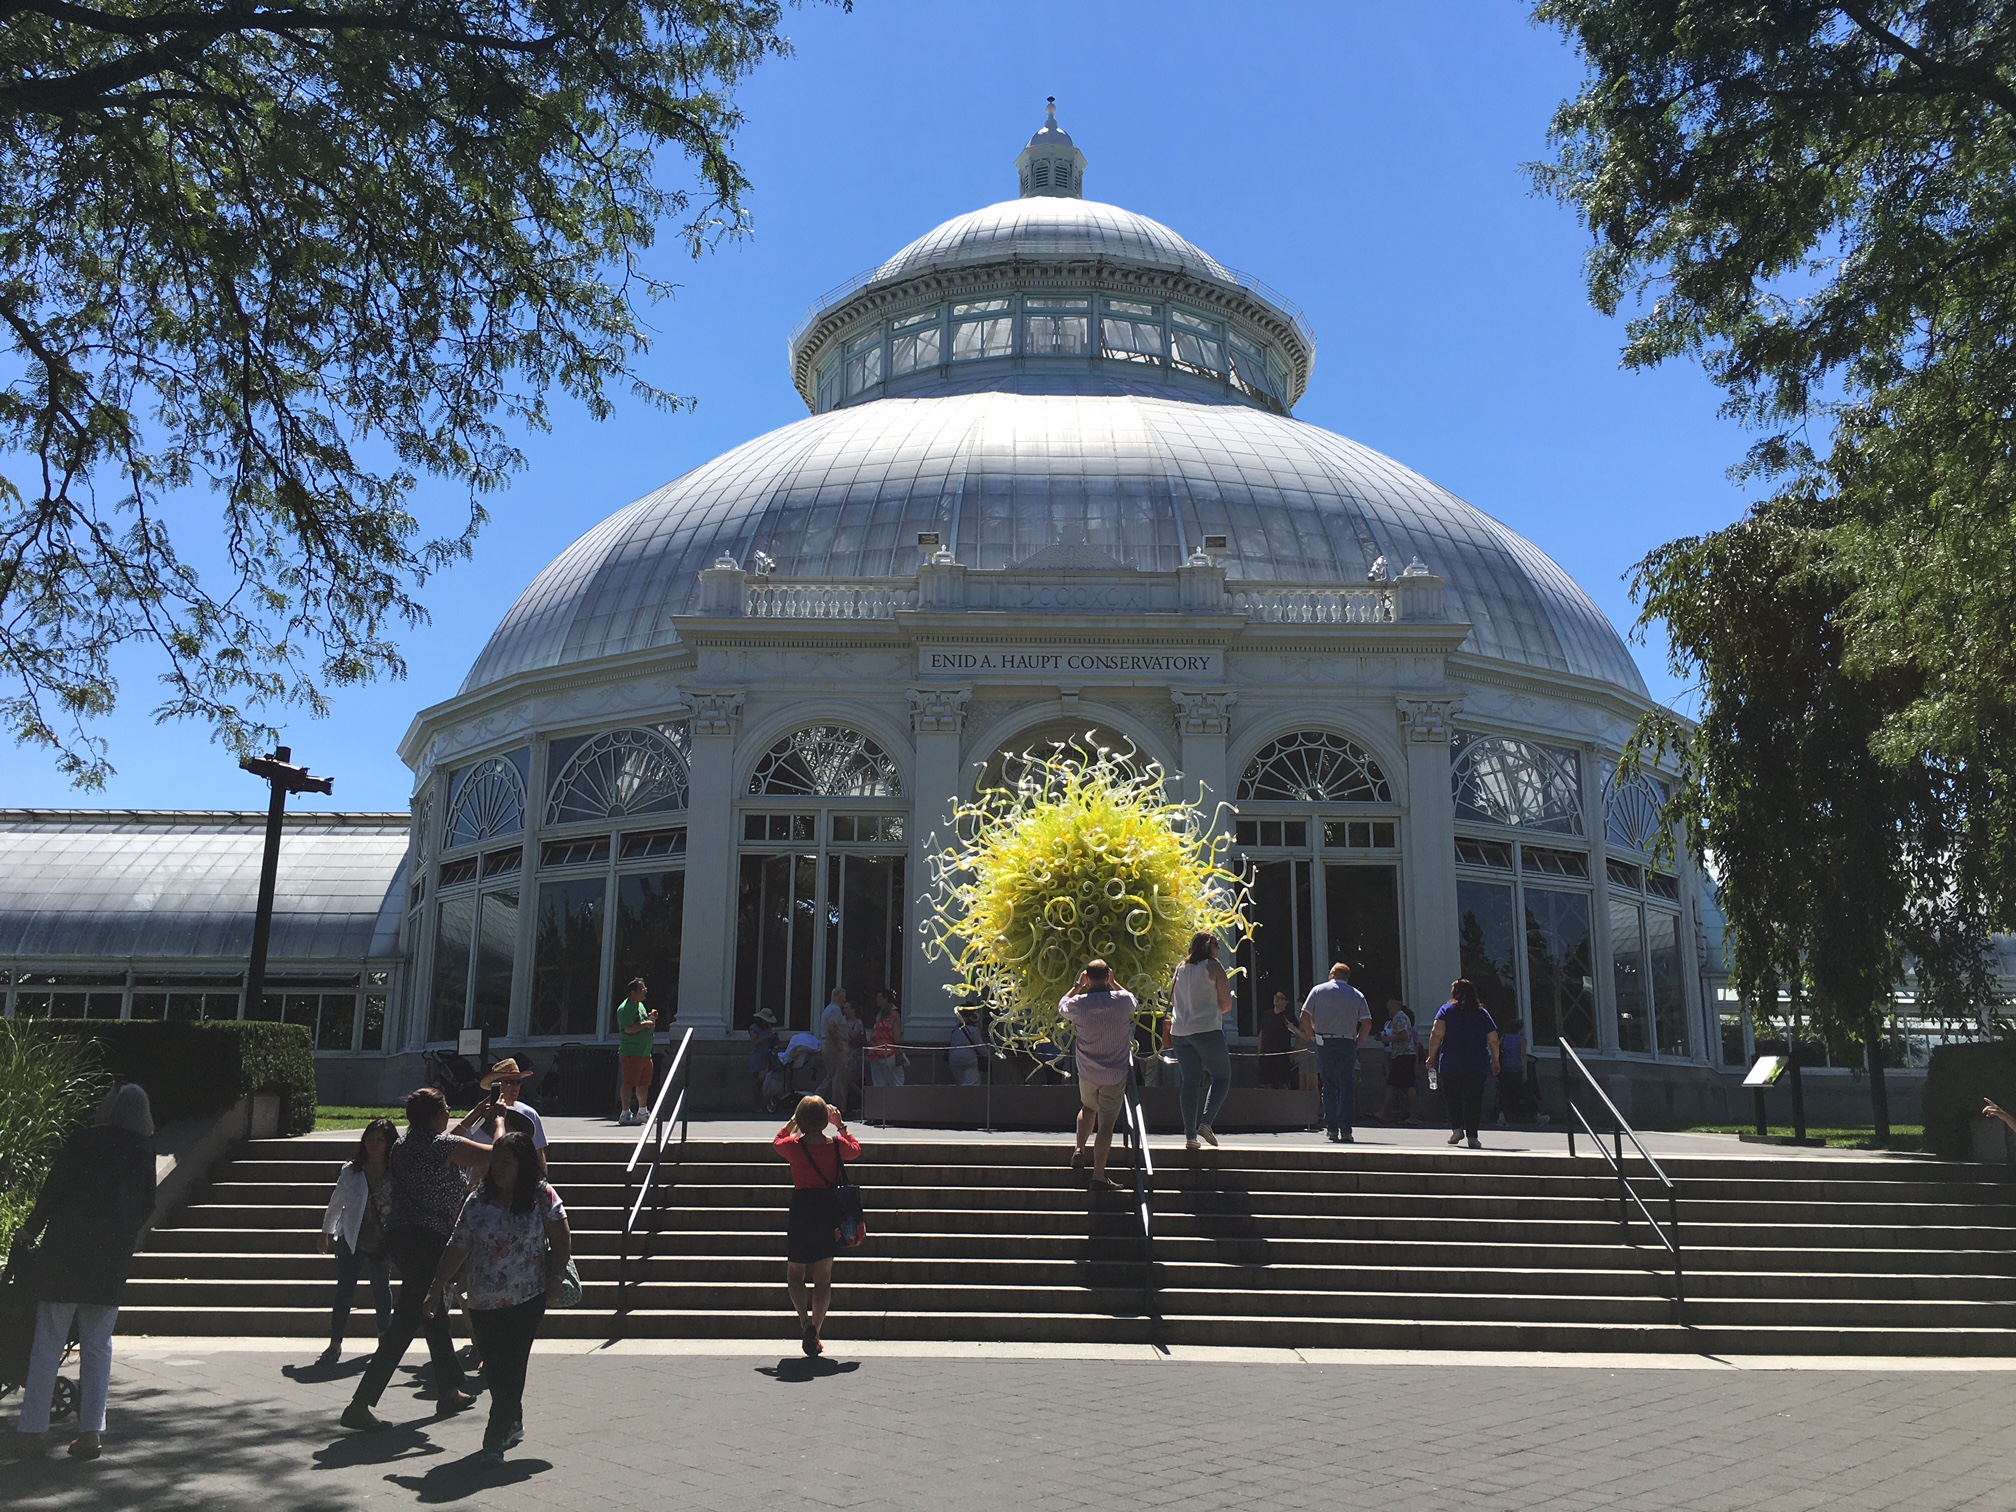 Chihuly sculptures at the NY Botanical Garden  7-30-2017